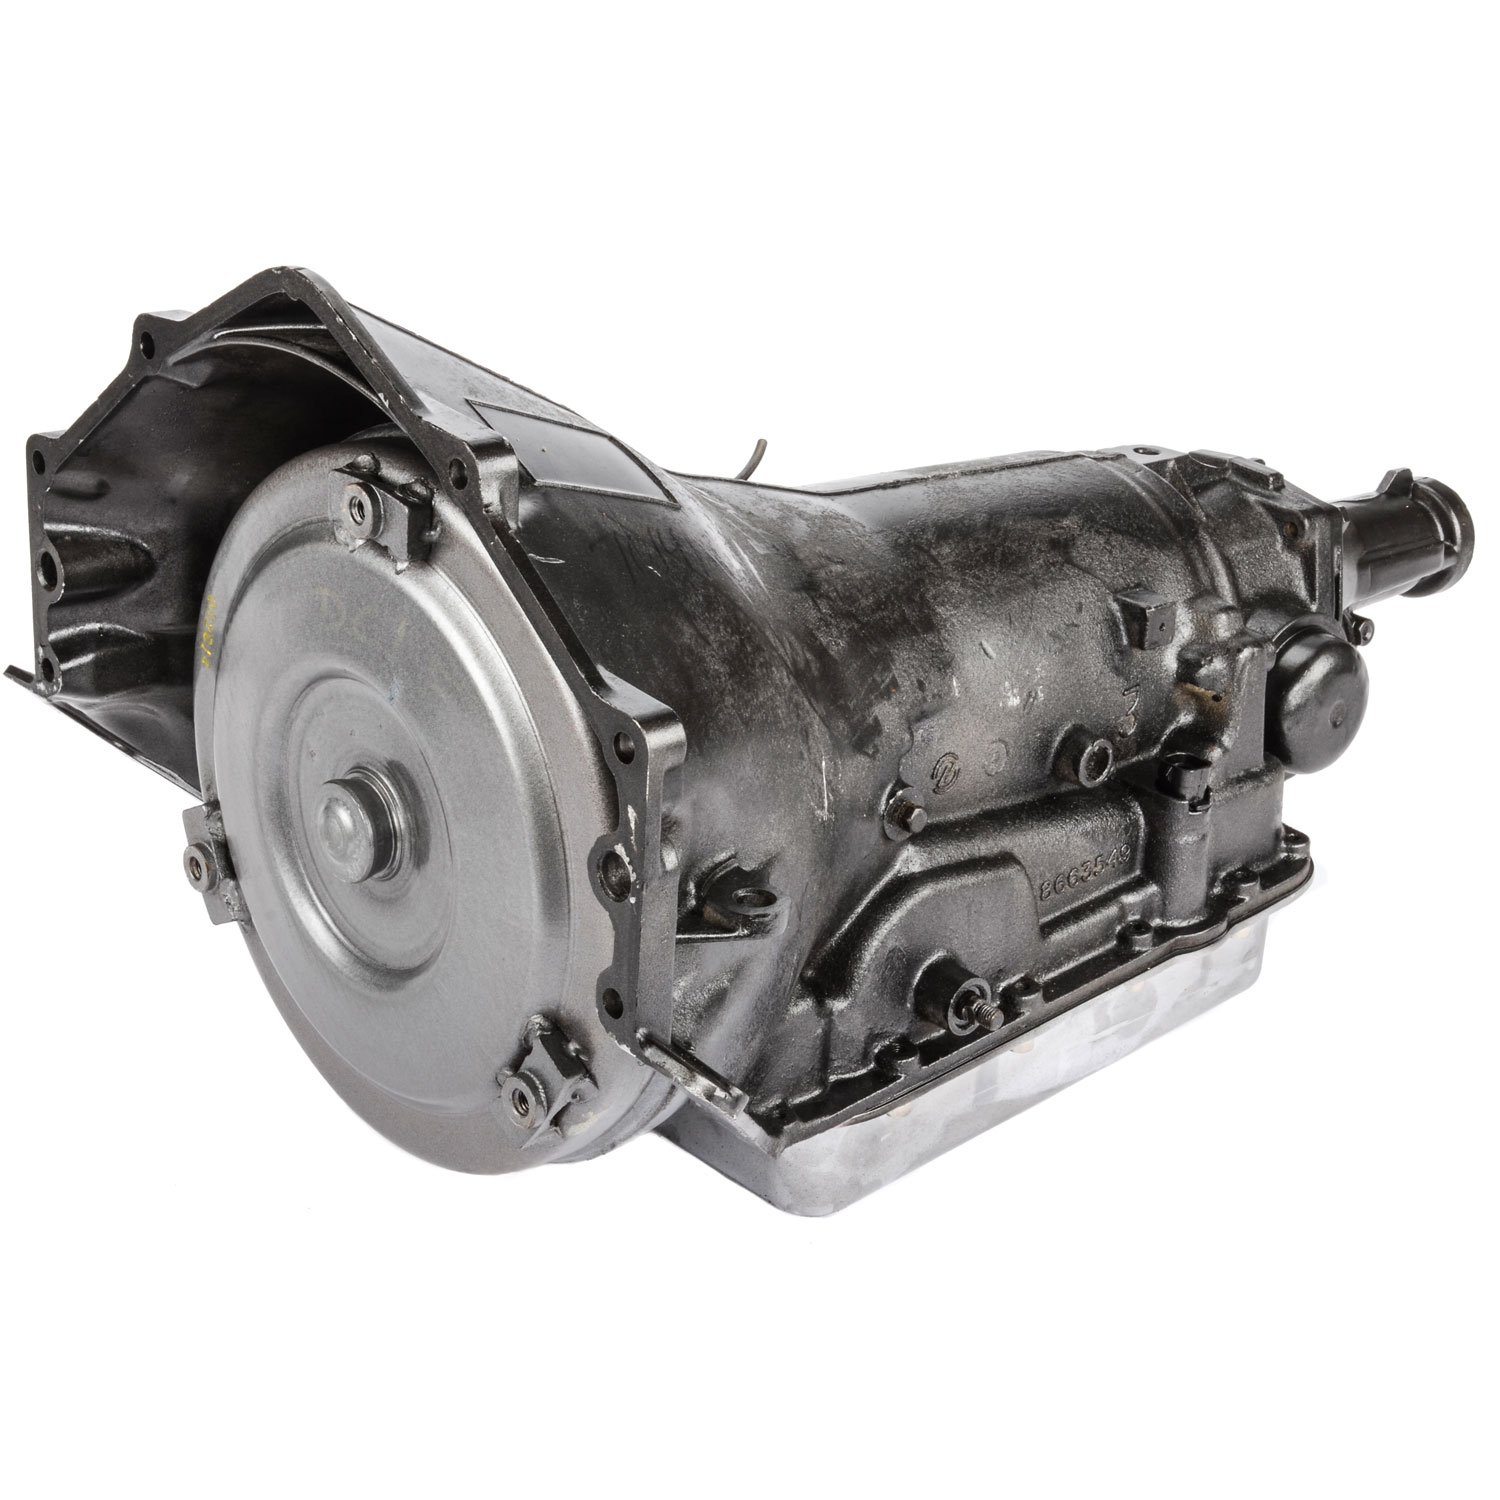 Street Smart 700R4 Transmission Package Includes: Stage 2 Street Smart 700R4 Transmission